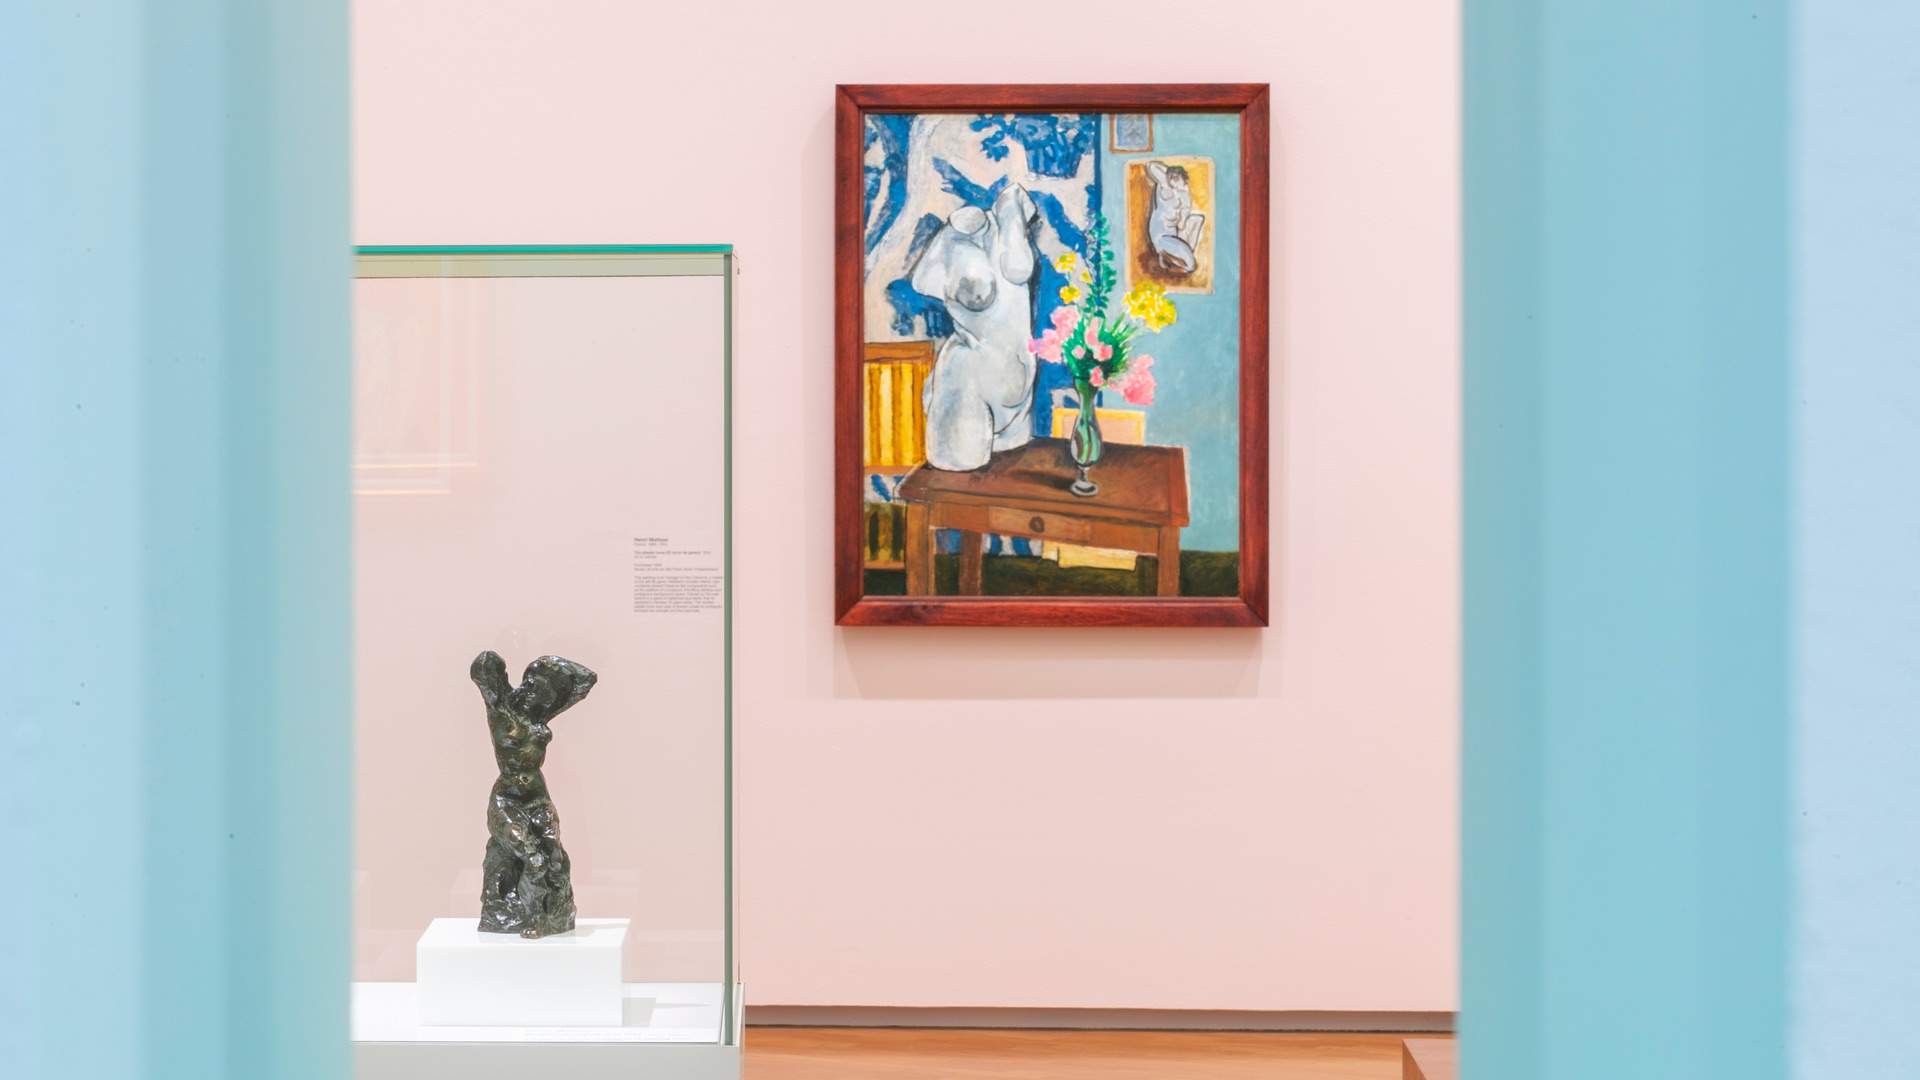 Six Works to See at the NGA's New Landmark 'Matisse & Picasso' Exhibition